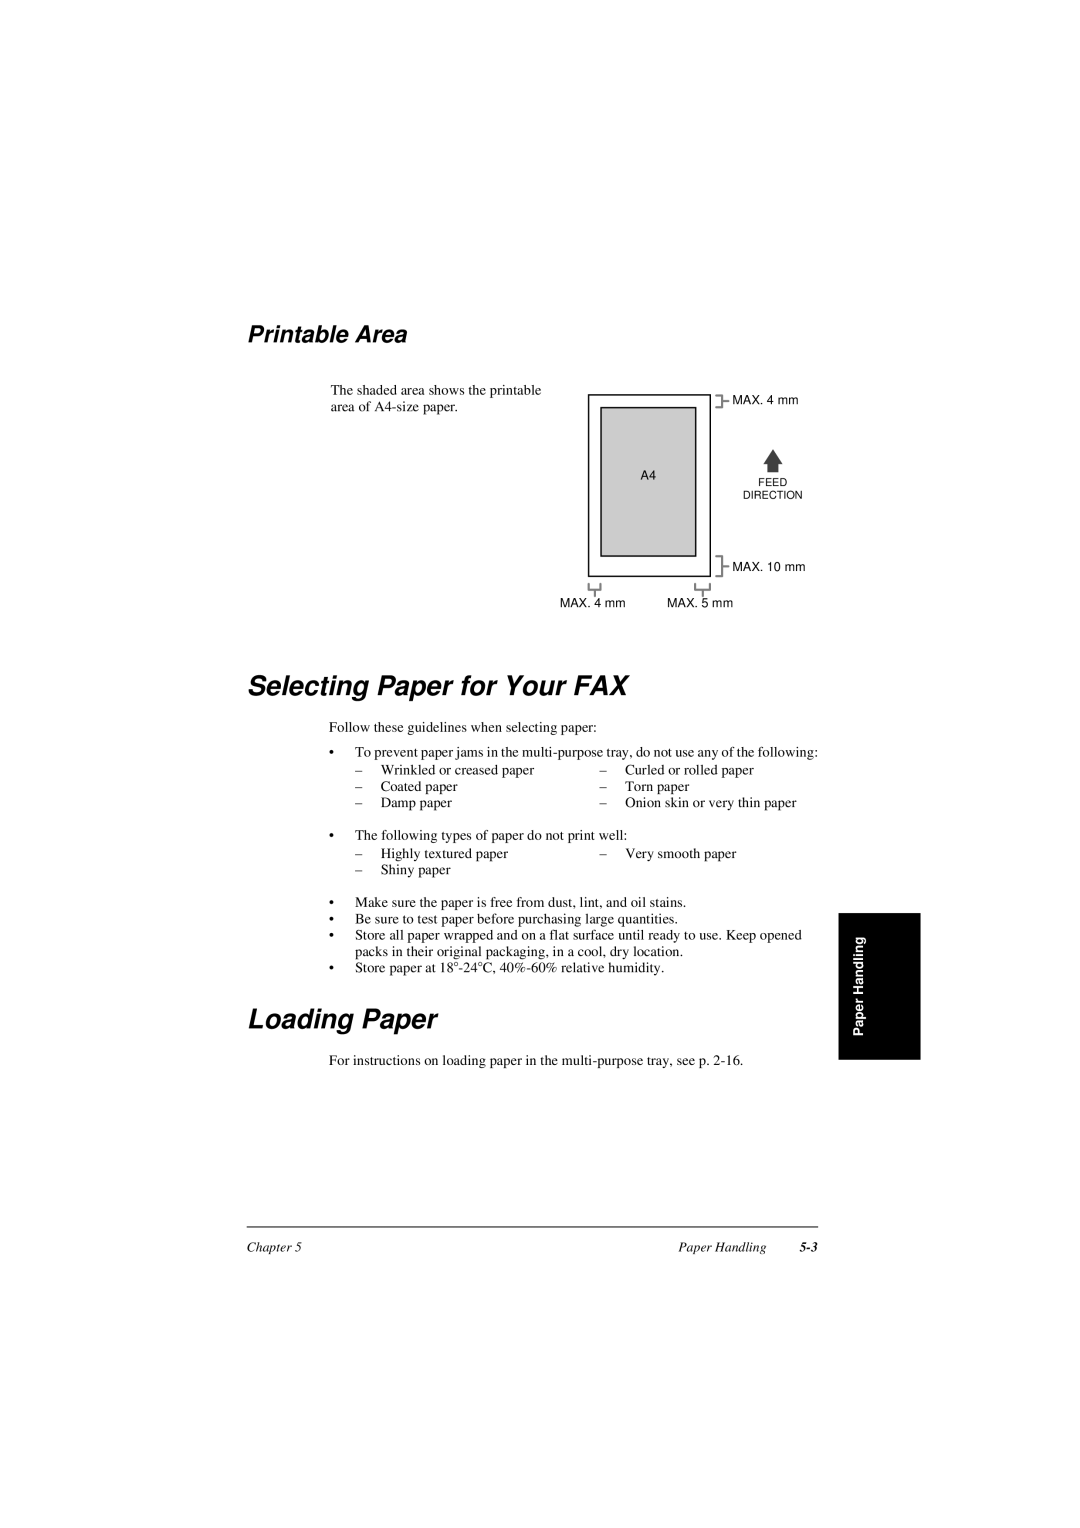 Canon L240, L290 manual Selecting Paper for Your FAX, Printable Area, Loading Paper, Onion skin or very thin paper 